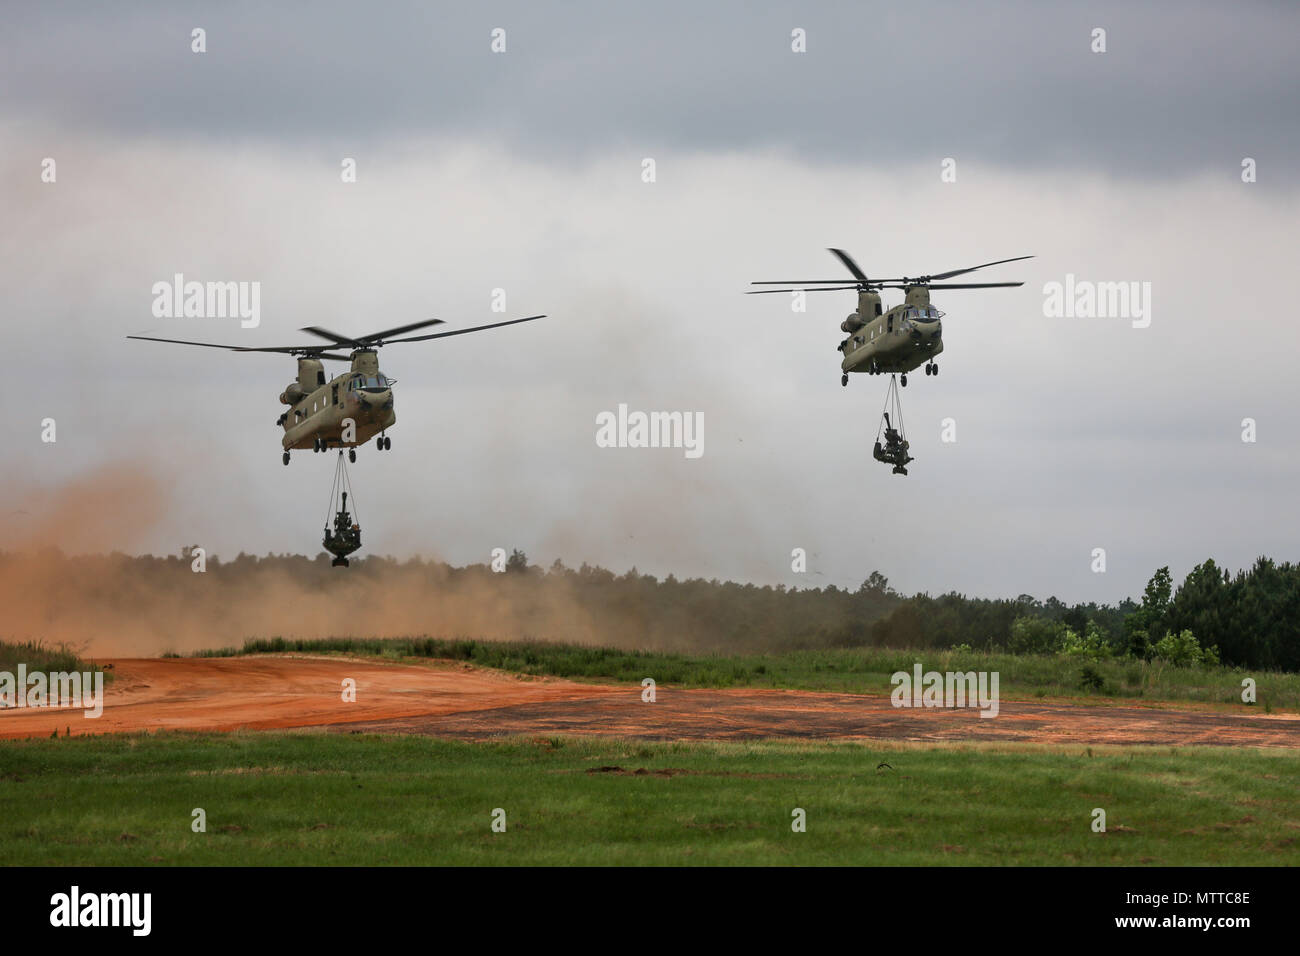 U.S. Army CH47 Chinooks drops M105 Howitzers at Sicily Drop Zone during the Airborne Review , All American Week XXIX May 24, 2018 at Fort Bragg, North Carolina . Paratroopers past and present converged on the center of the military universe to celebrate being members of the All American Division and America's Guard of Honor. (U.S Army photo by Spc. Jada Owens) Stock Photo